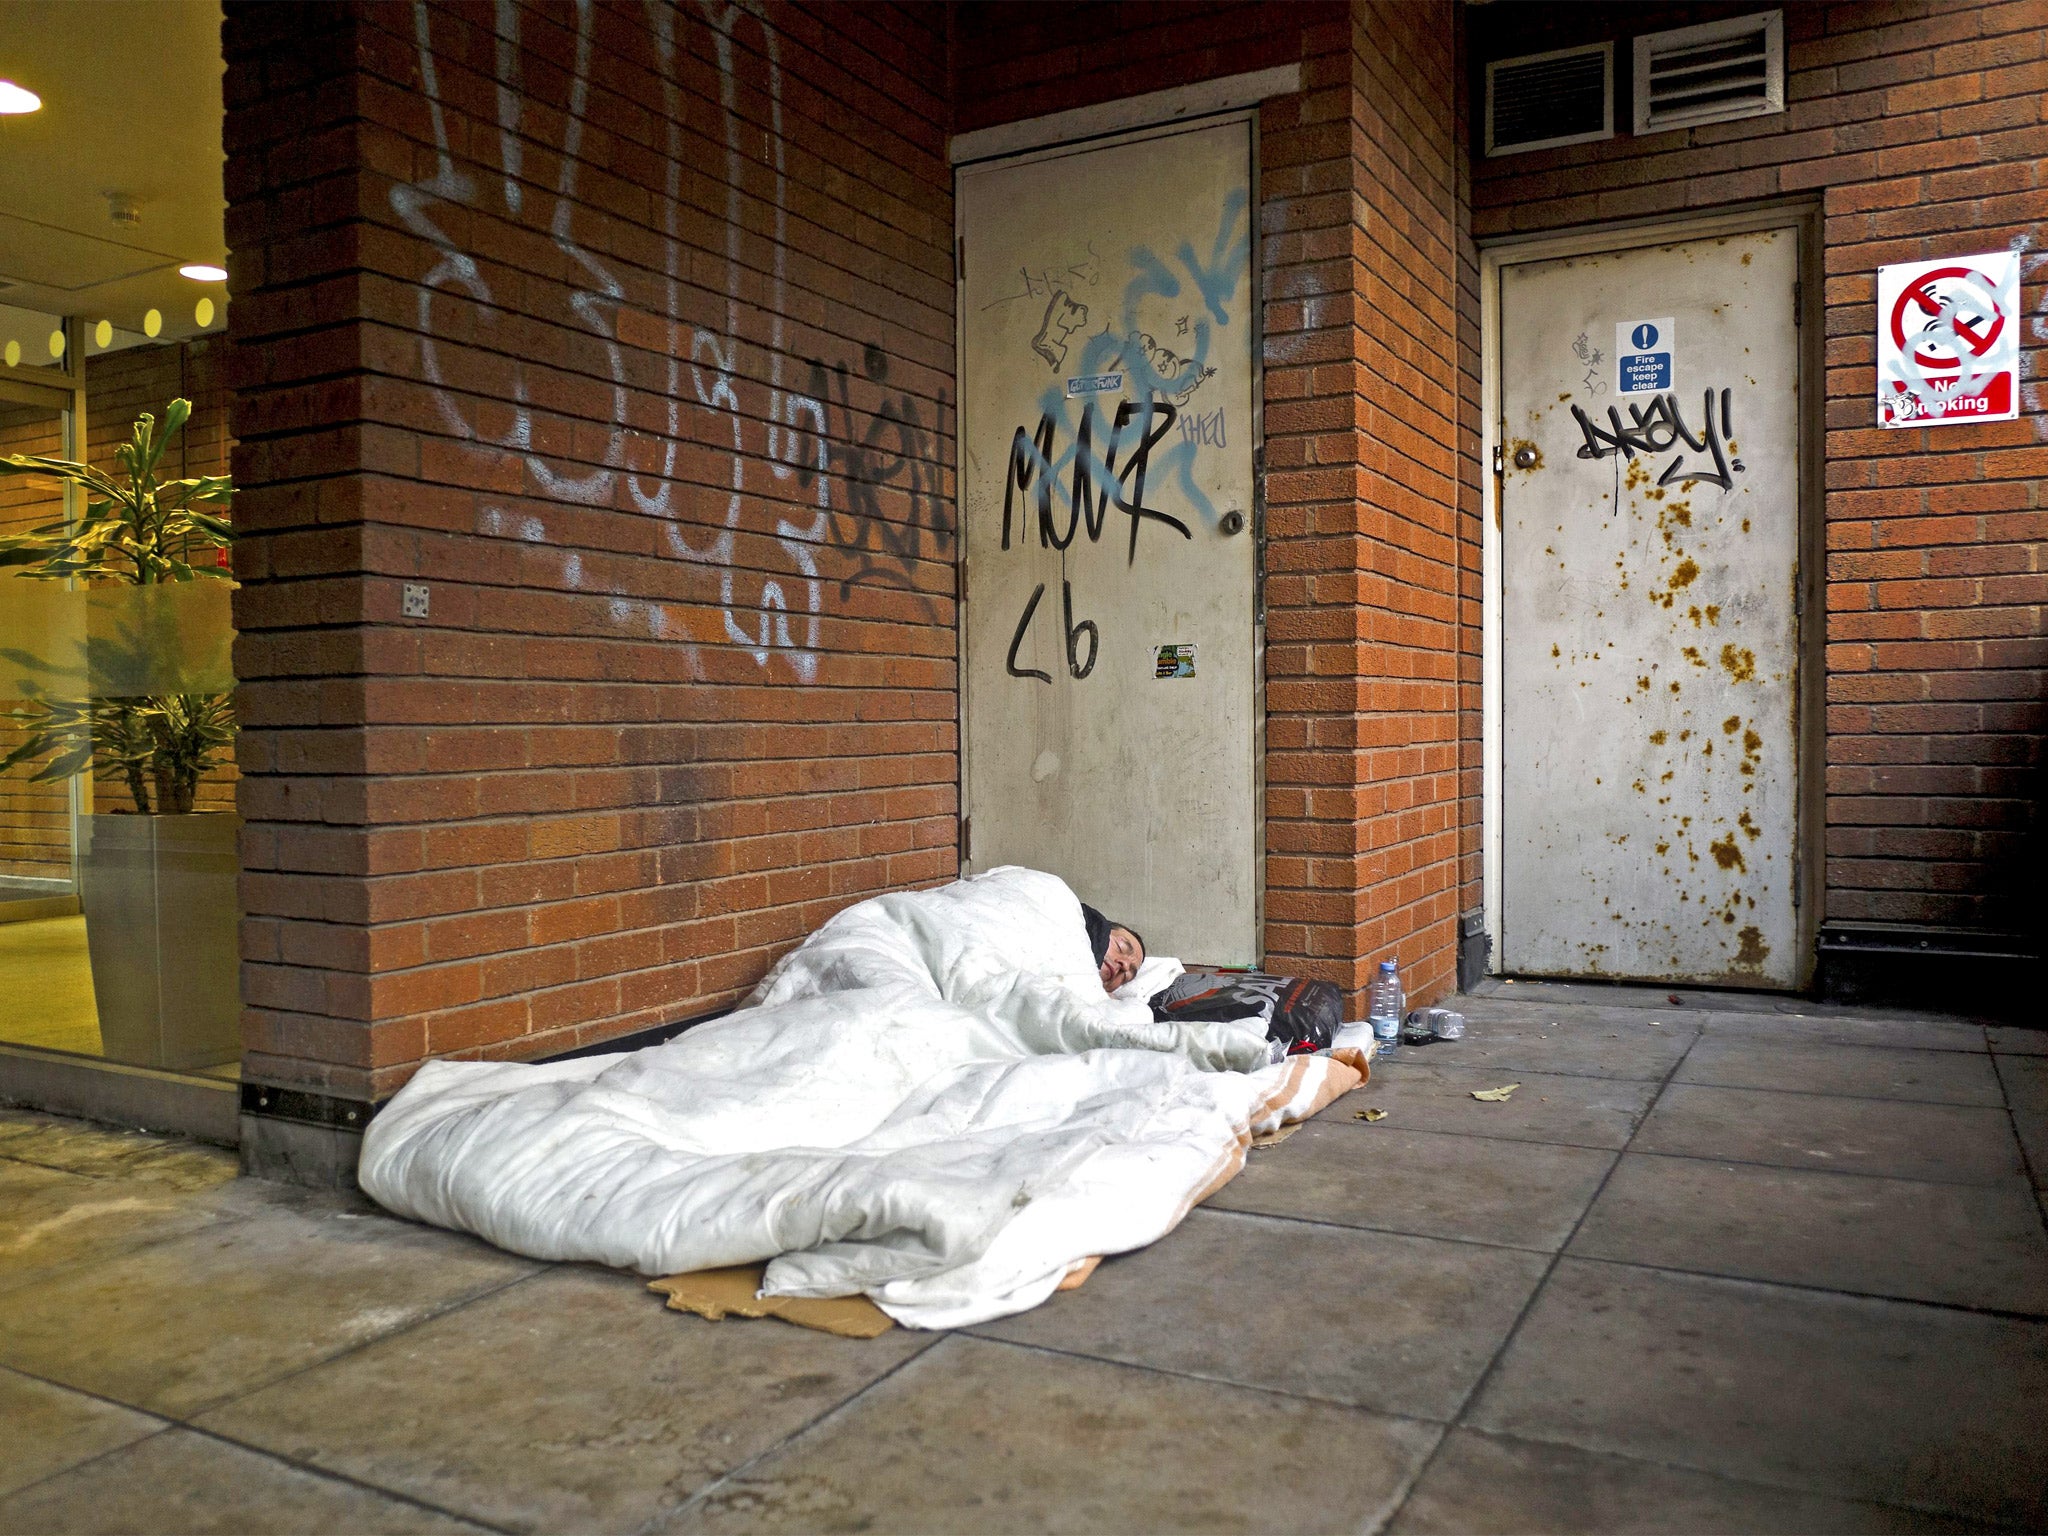 The council rejected claims they trying to force homeless people off the streets